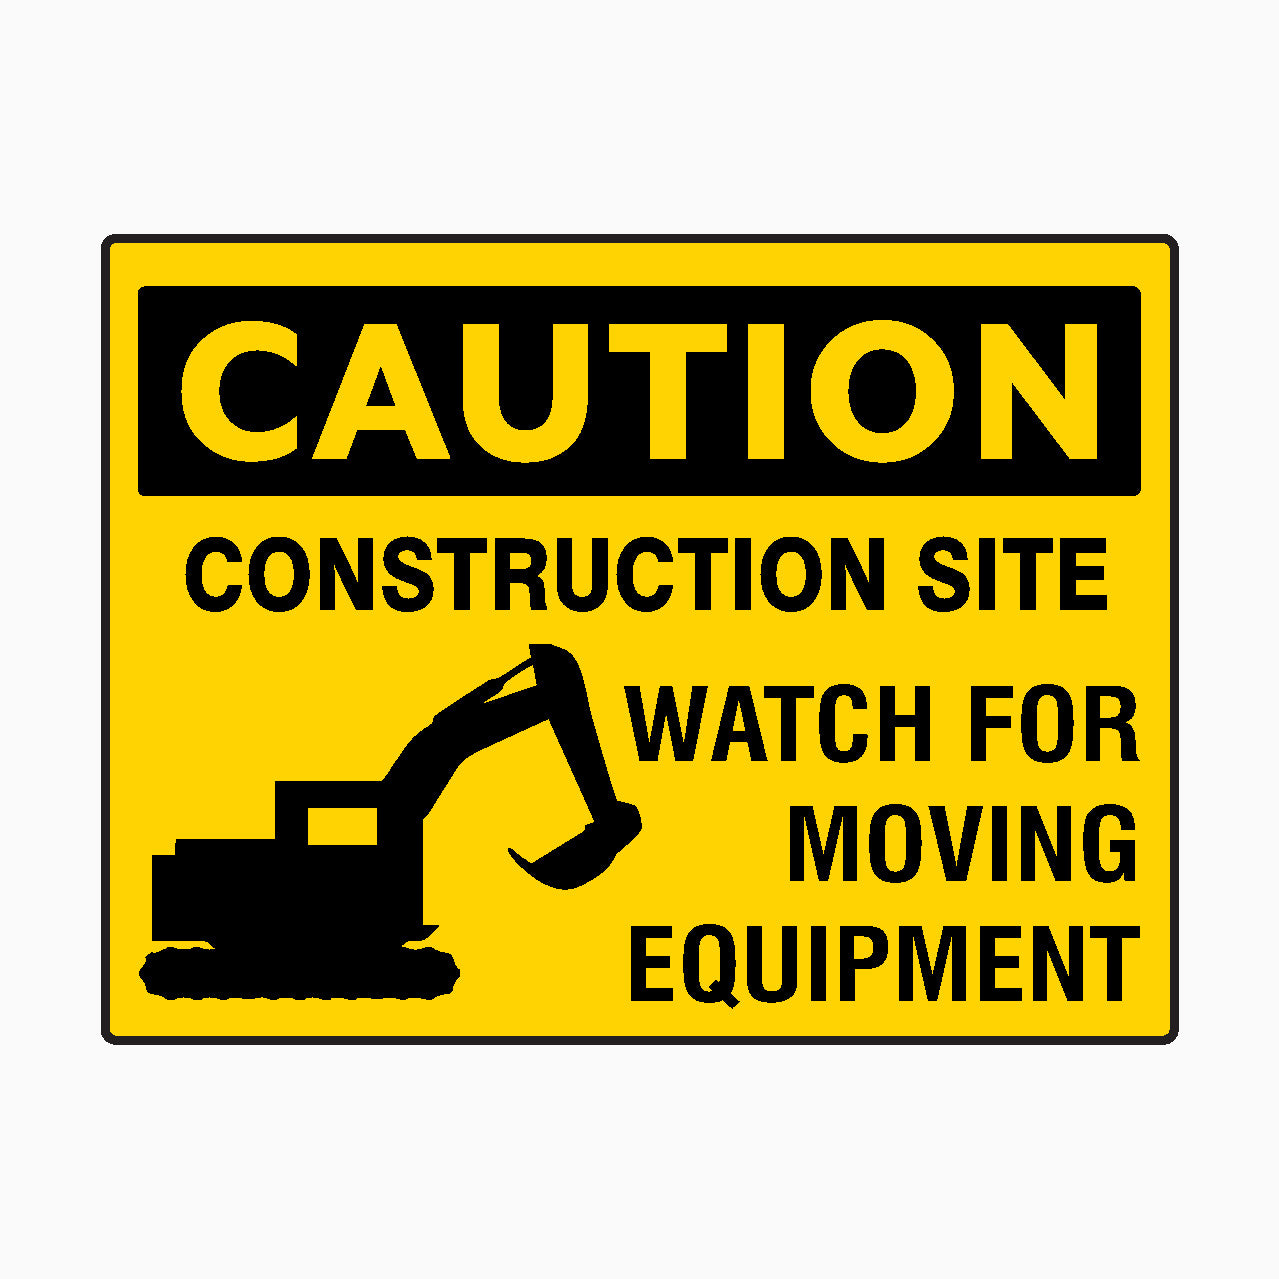 CAUTION SIGN - CONSTRUCTION SITE WATCH FOR MOVING EQUIPMENT SIGN